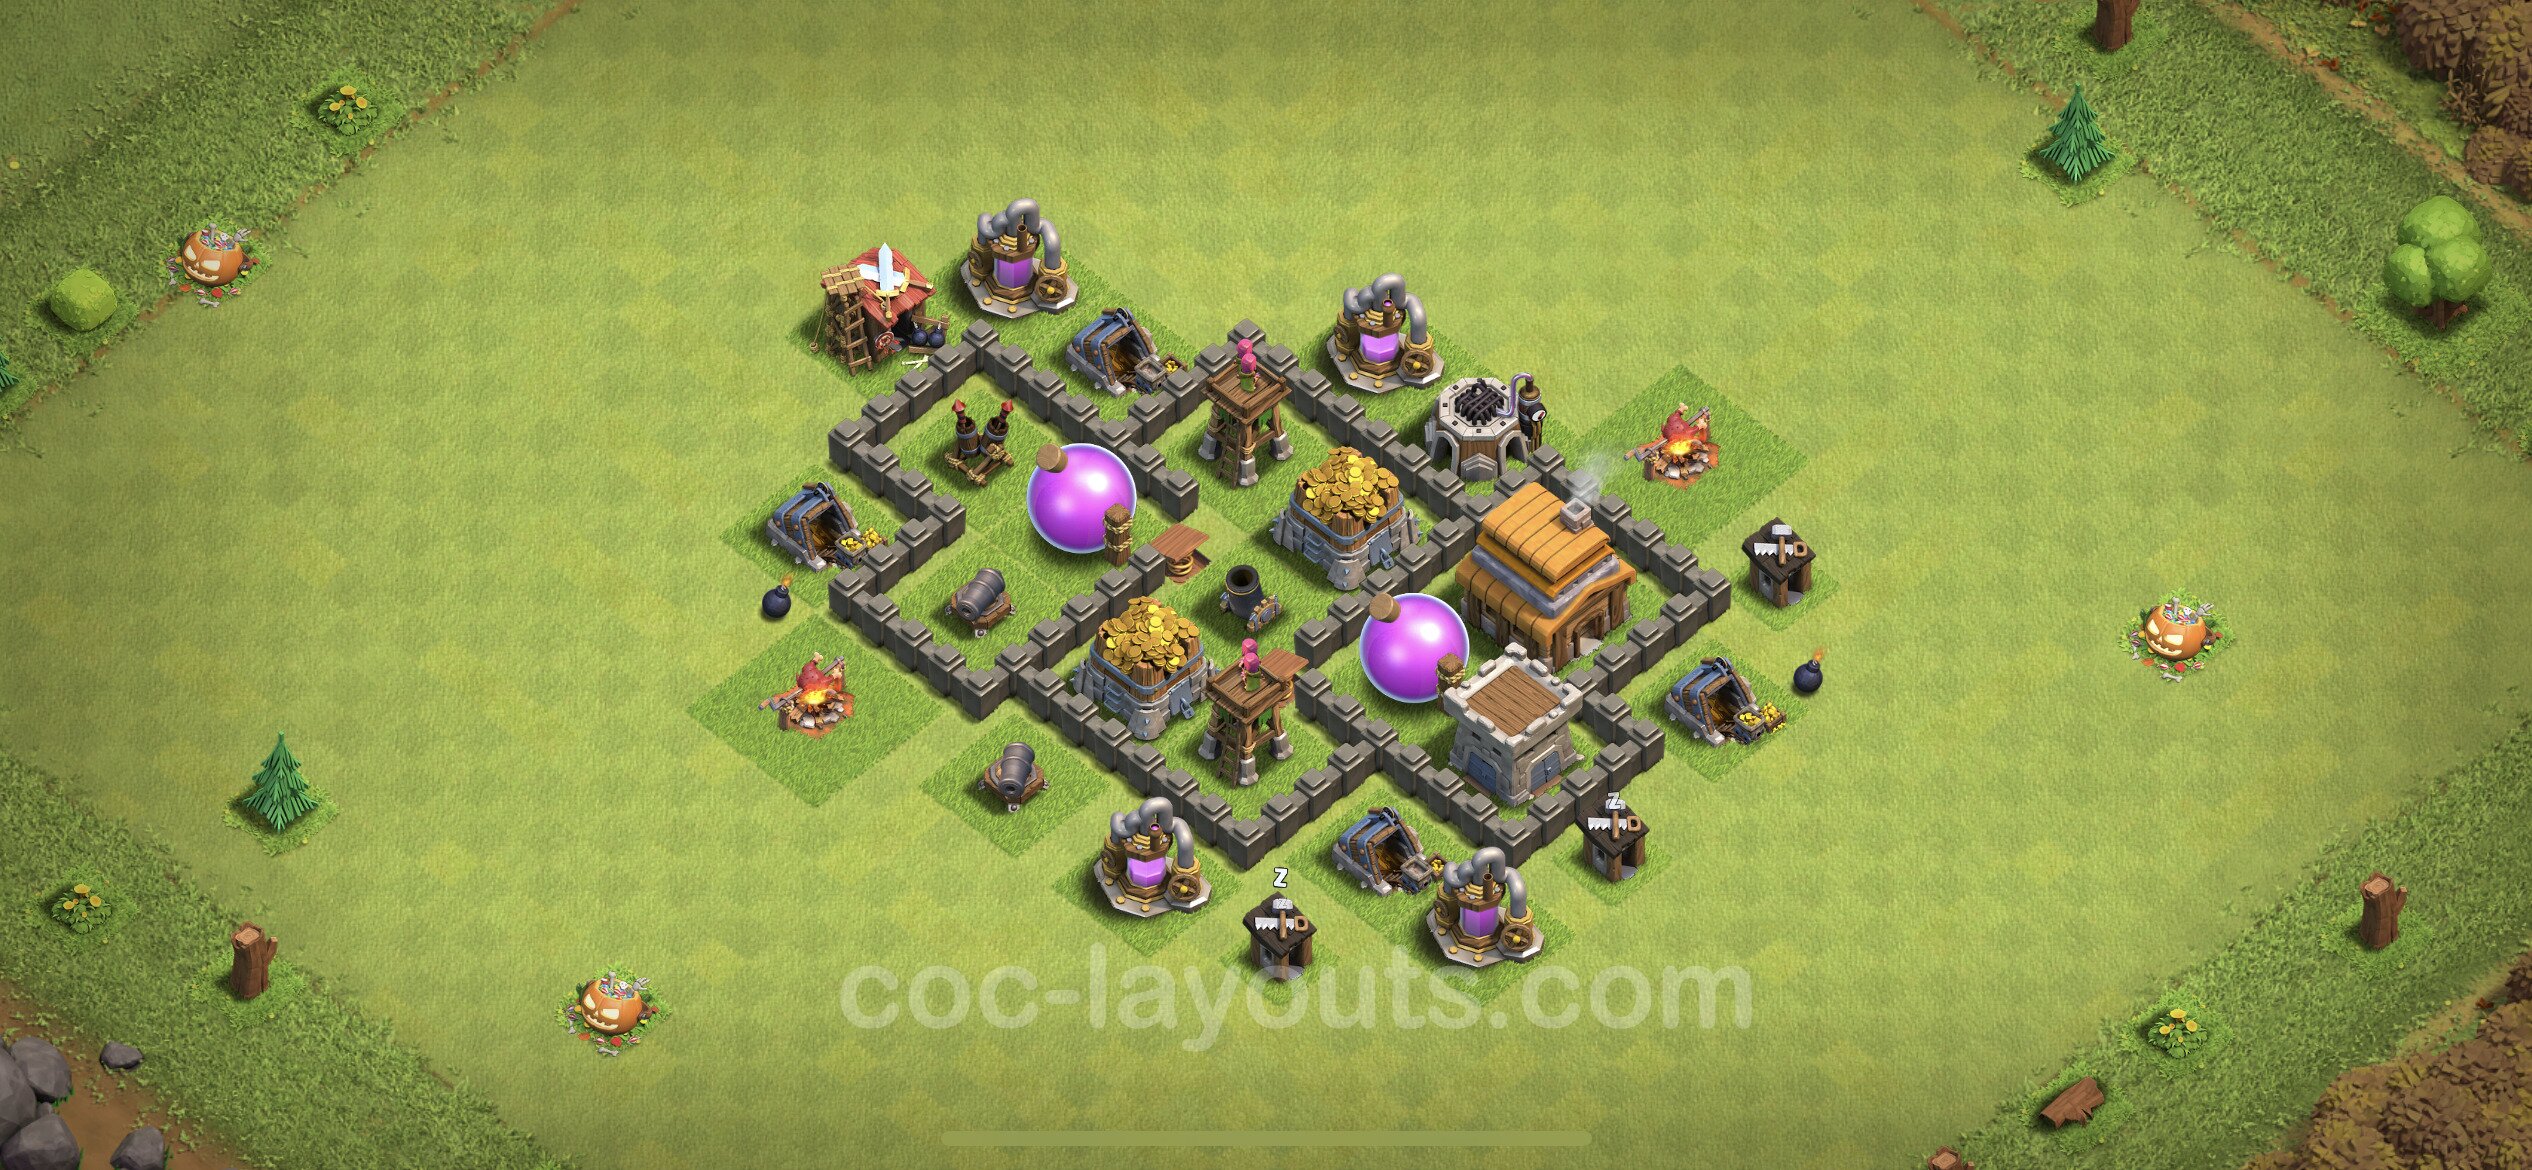 Farming Base TH4 Max Levels with Link - plan / layout / design - Clash of C...